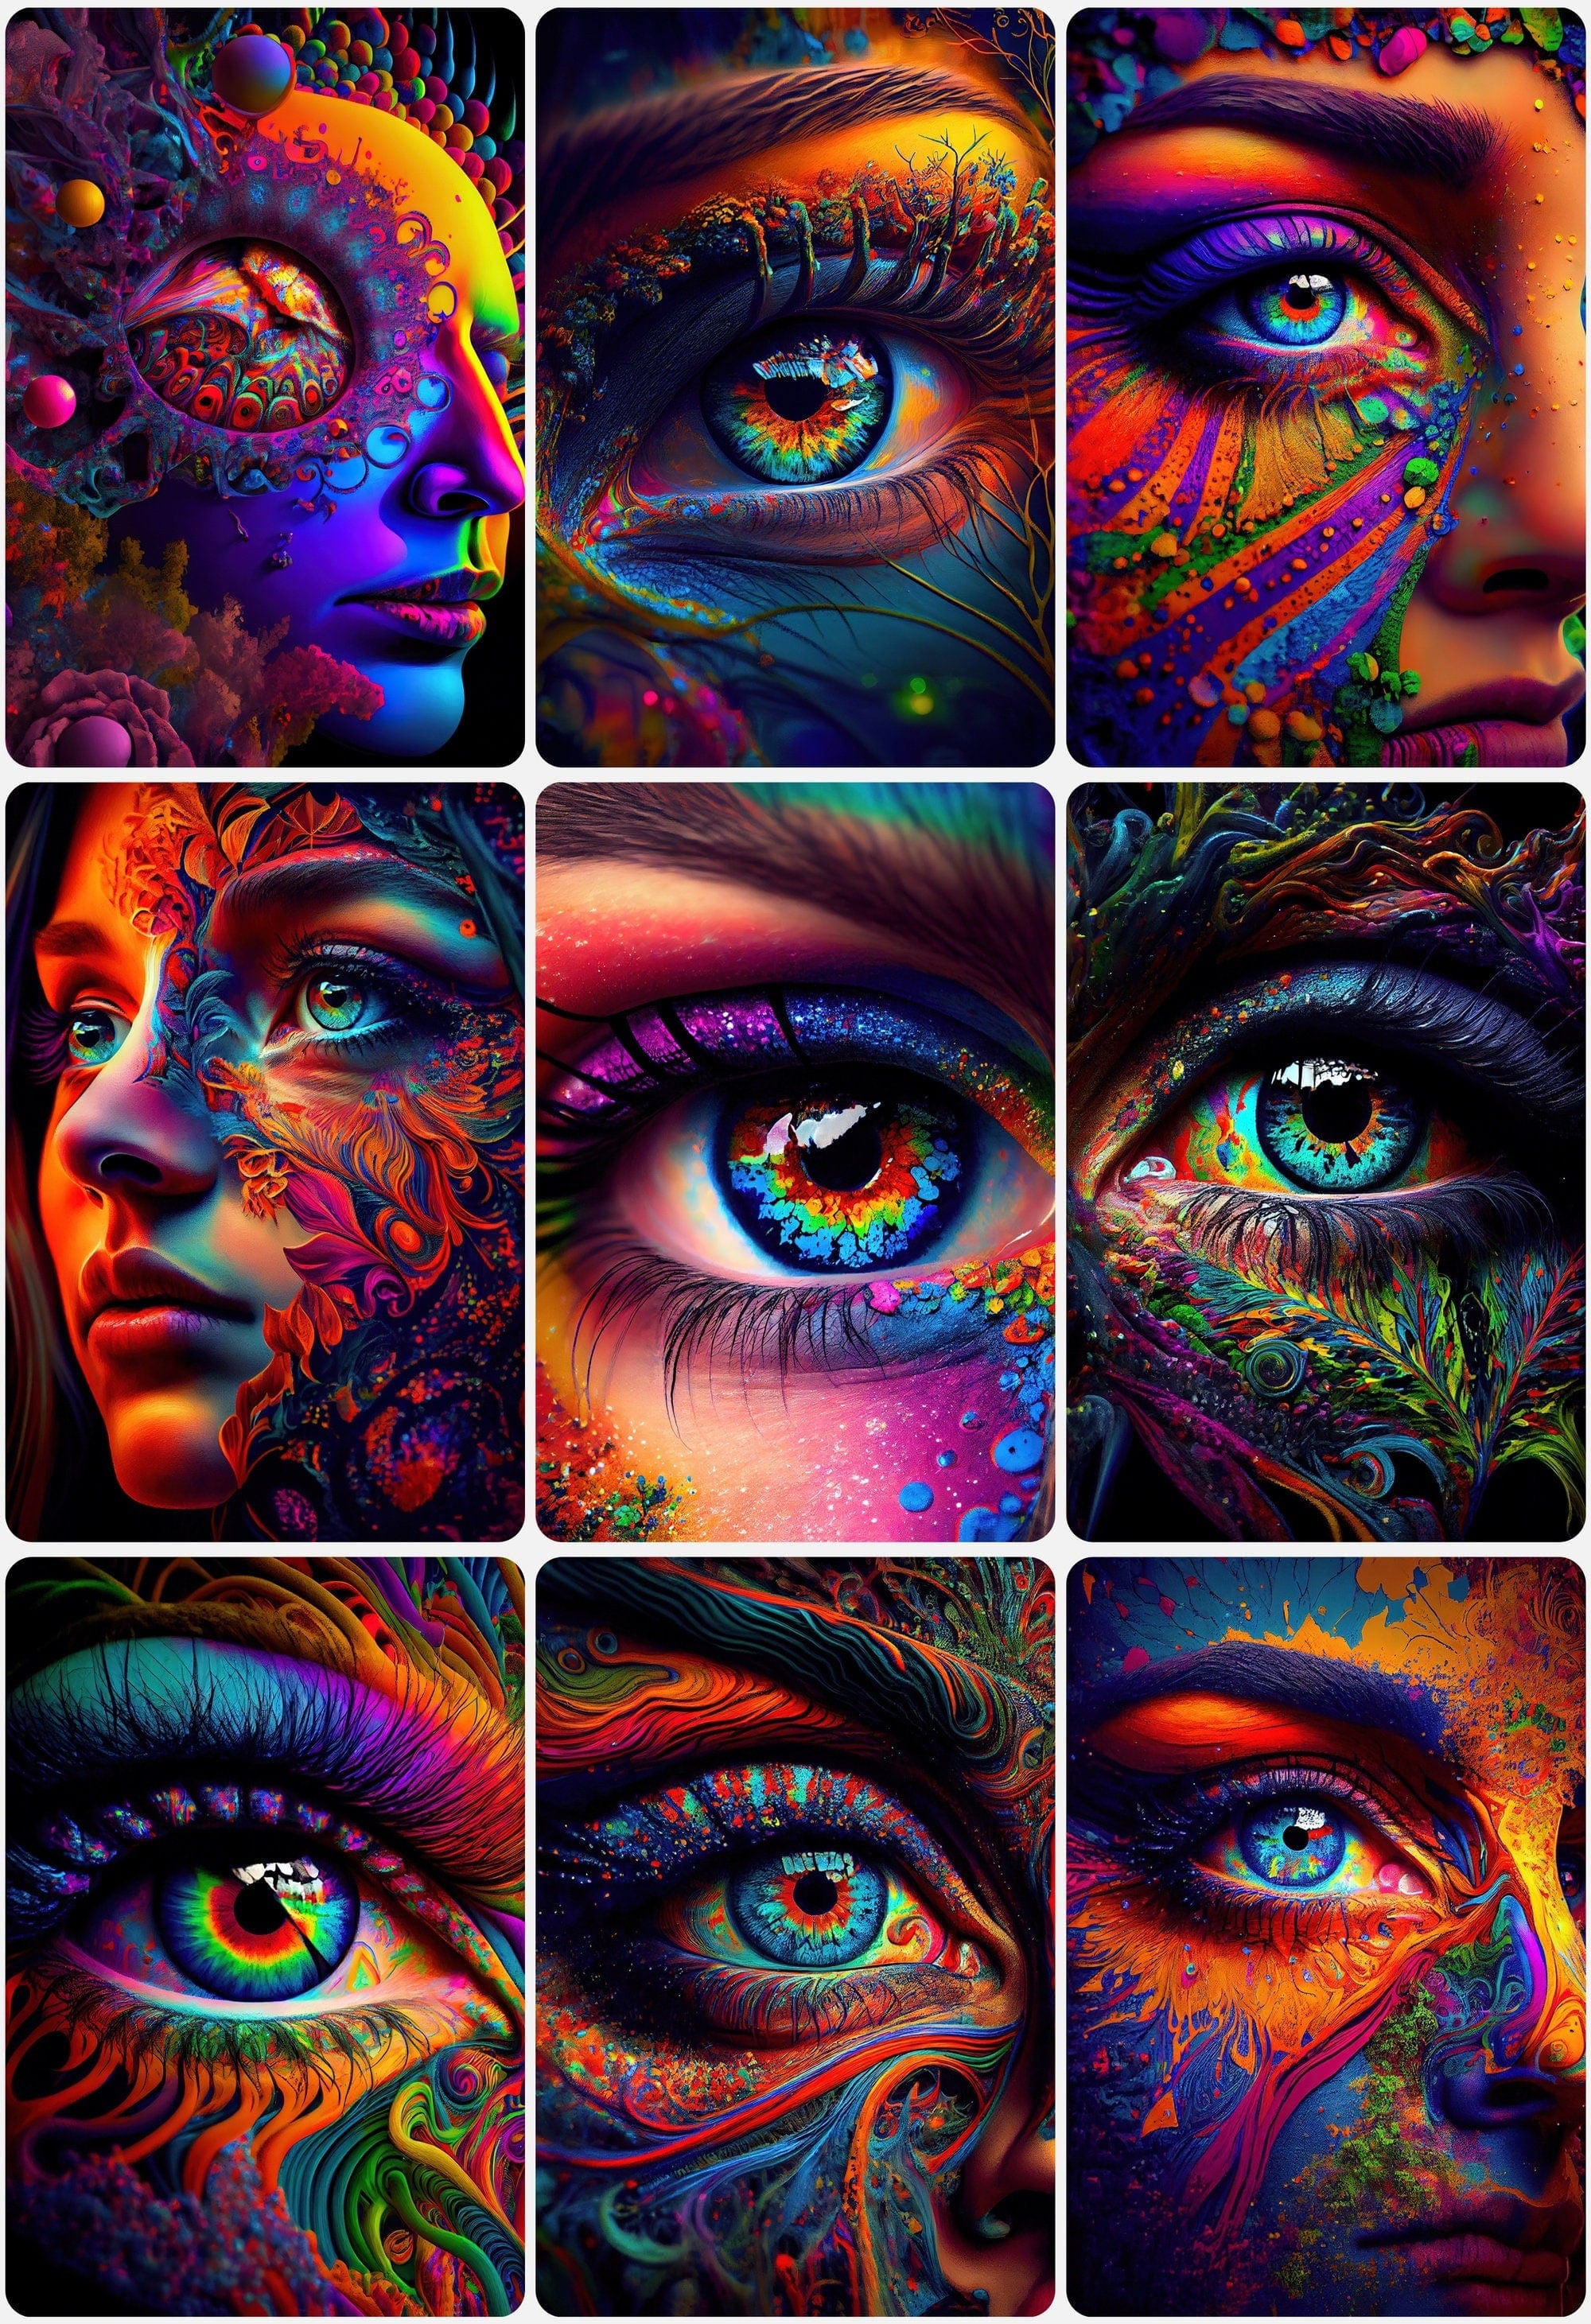 Psychedelic Eyes - Unleash Your Creativity and Add a Pop of Color to Your Artworks - Printable Psychedelic Eye Images. Wall art Digital Download Sumobundle